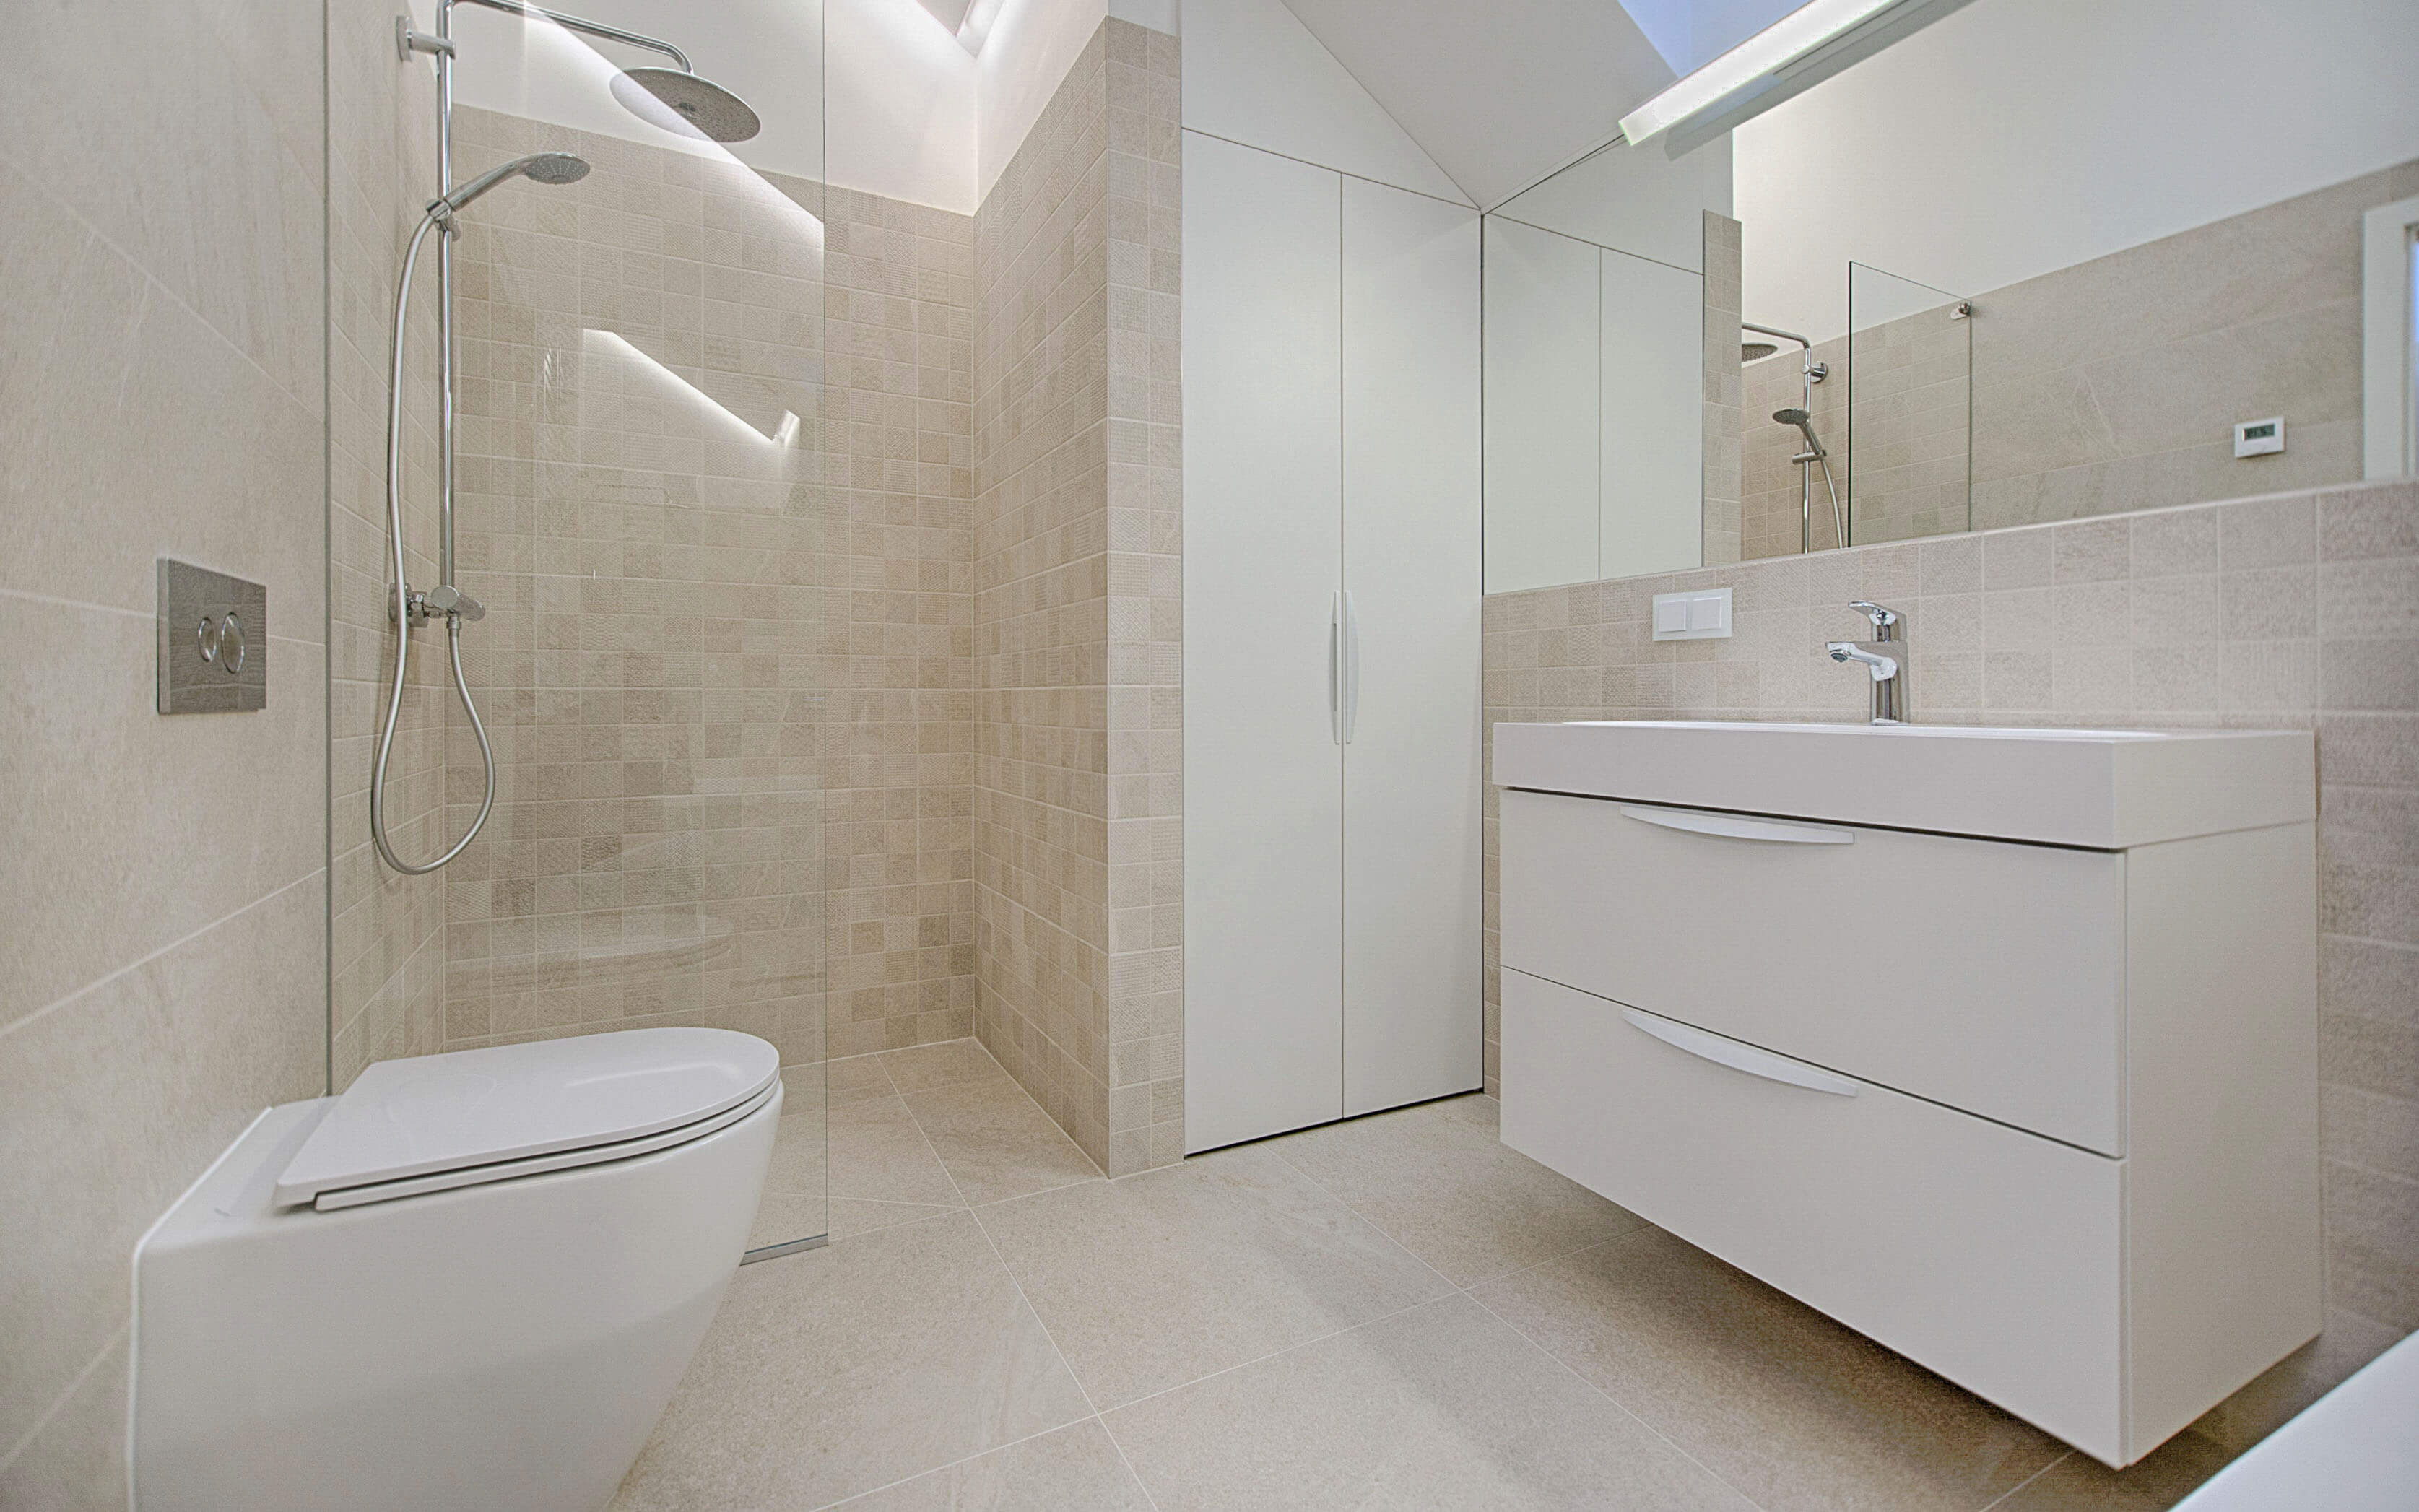 Small sand colored bathroom with a compact toilet, built in linnen closet and floating vanity